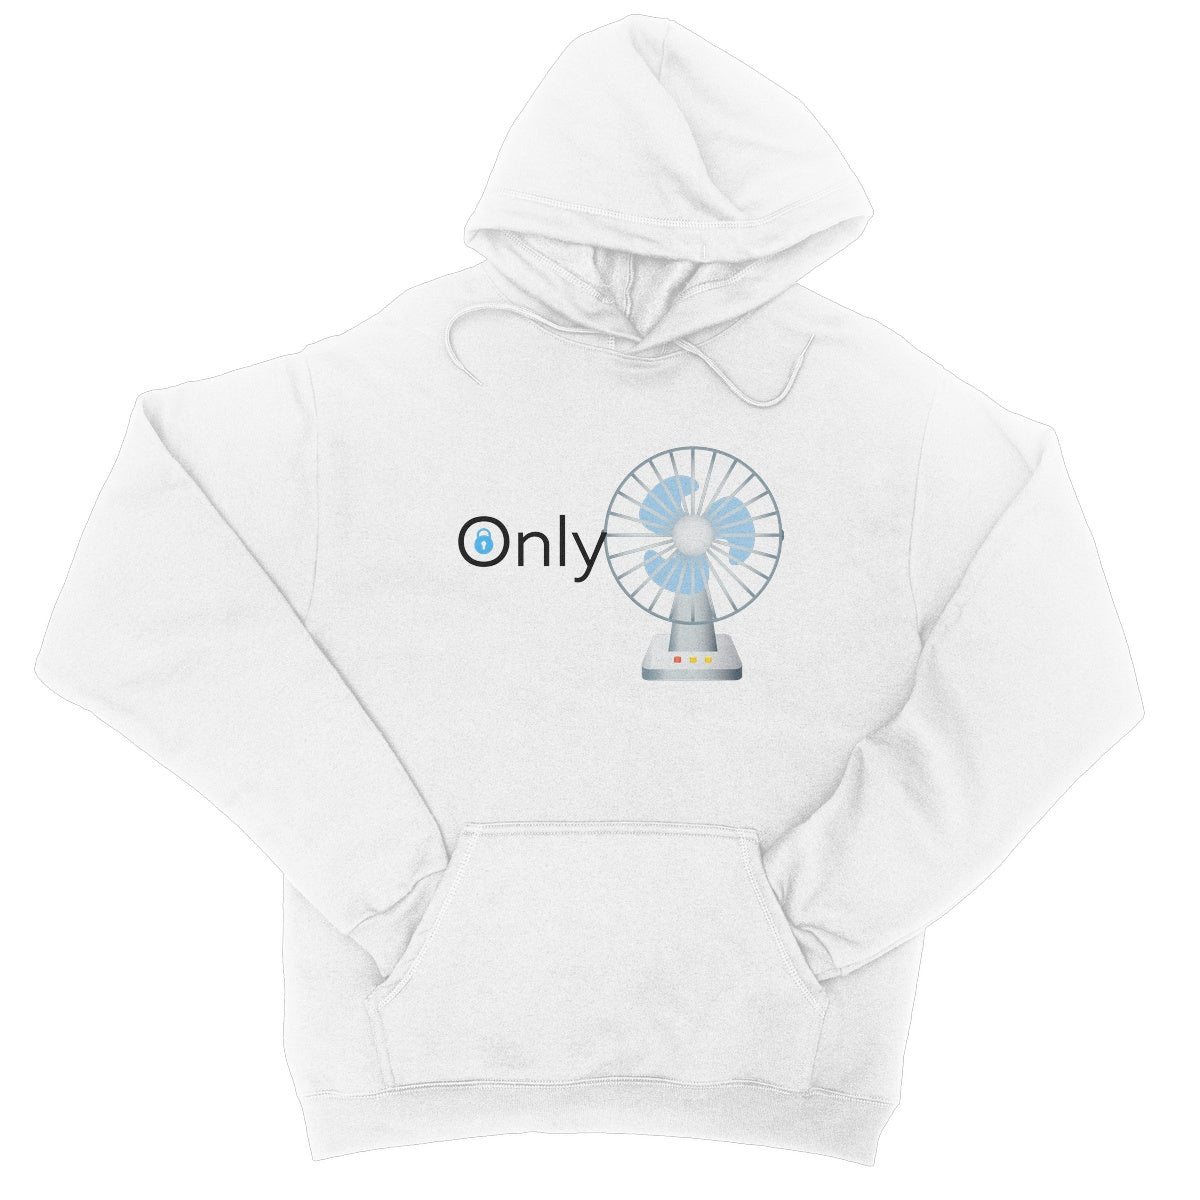 only fans hoodie white